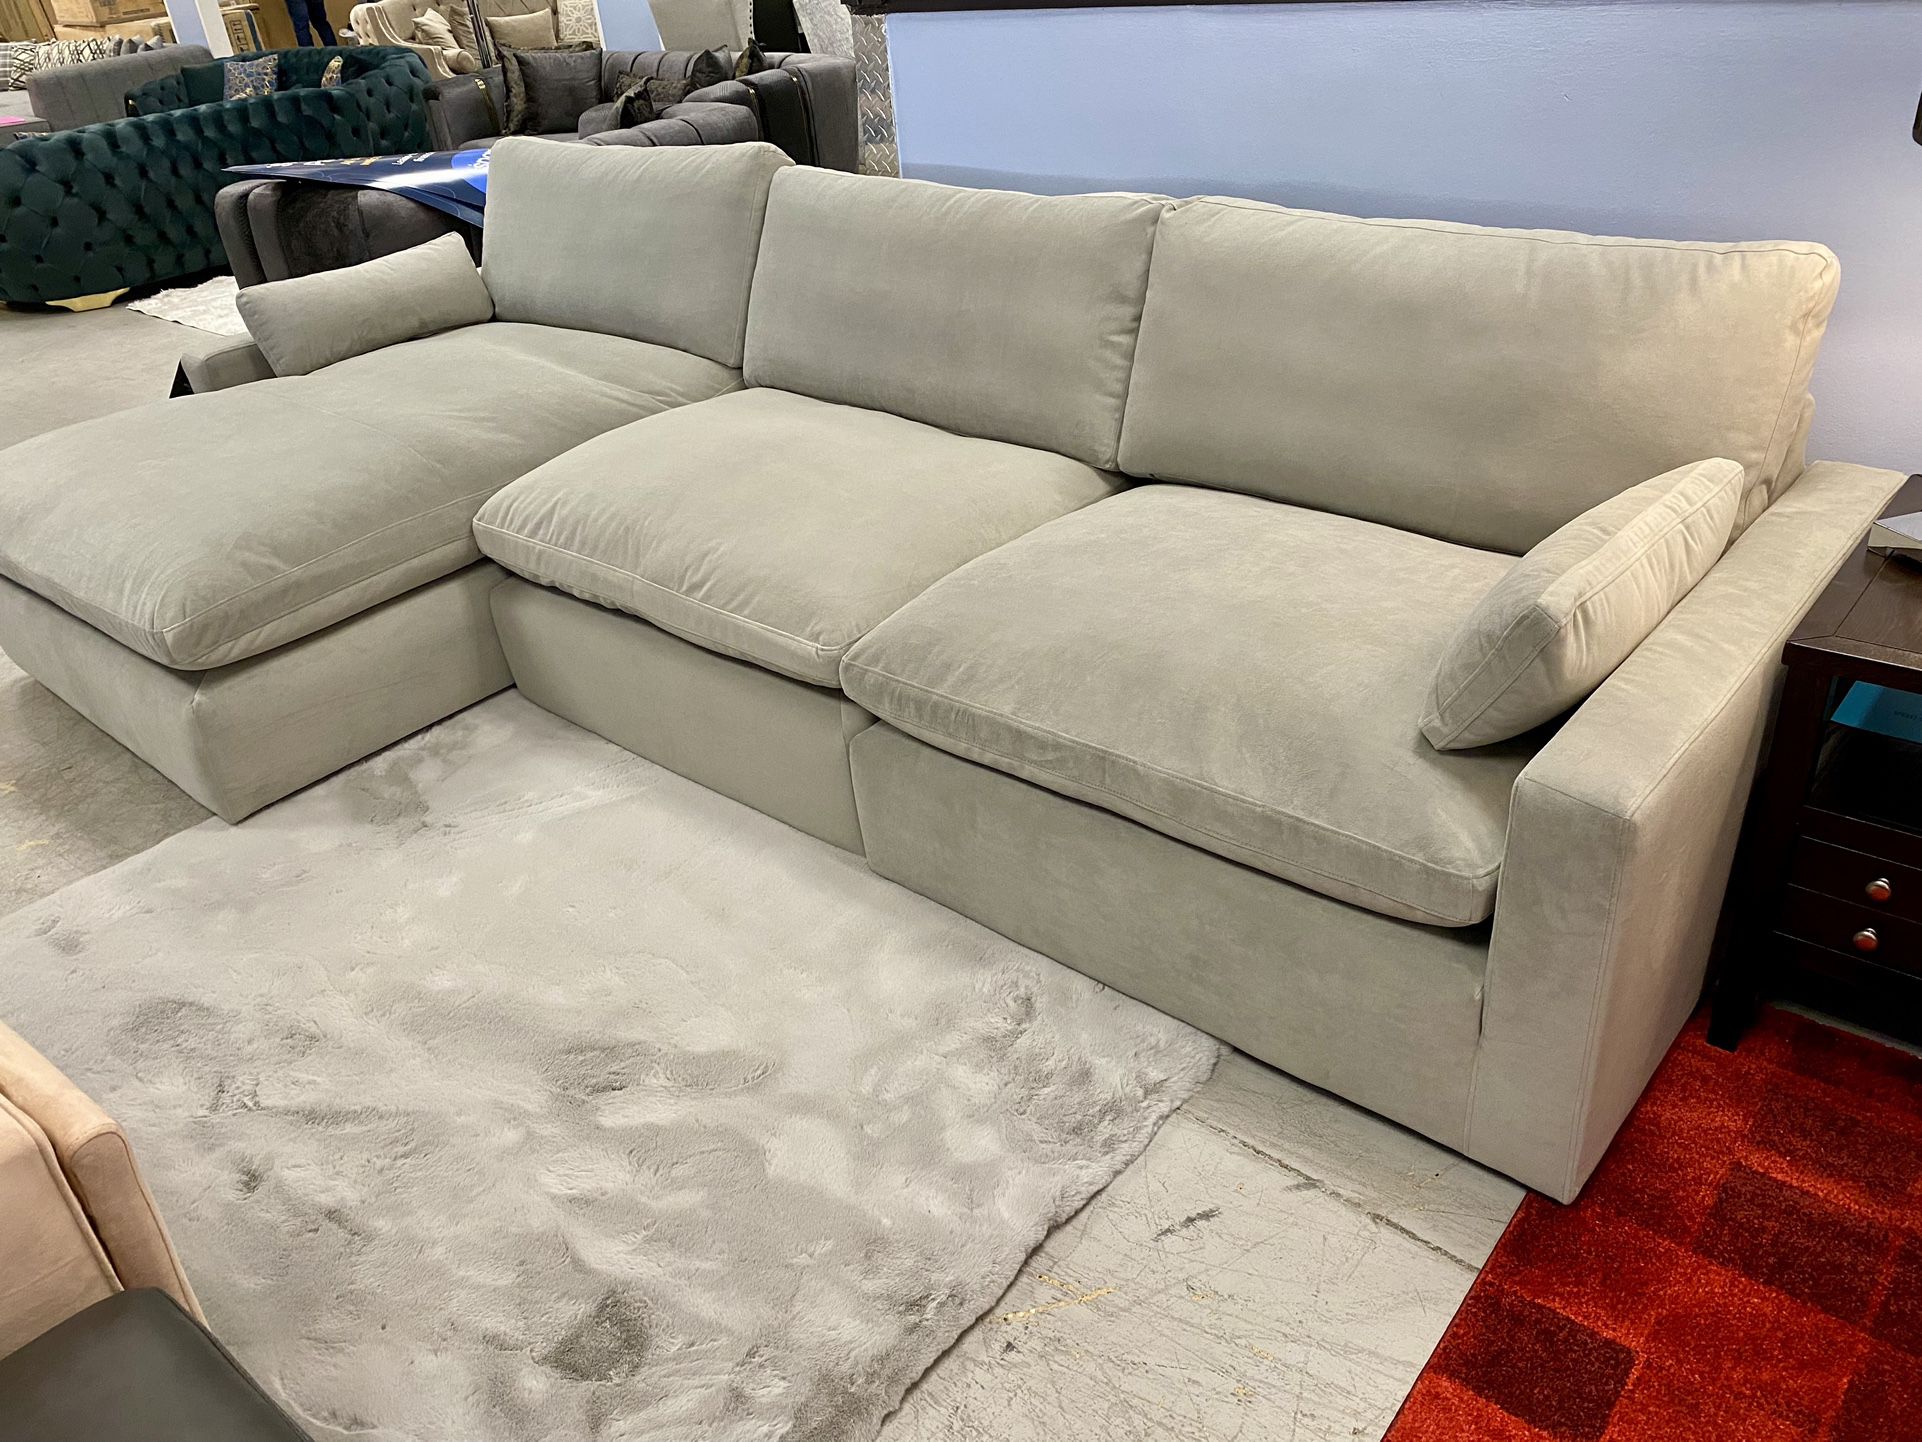 Modular Cloud Sectional, Soft Couch, Soft Sofa, Modern Couch